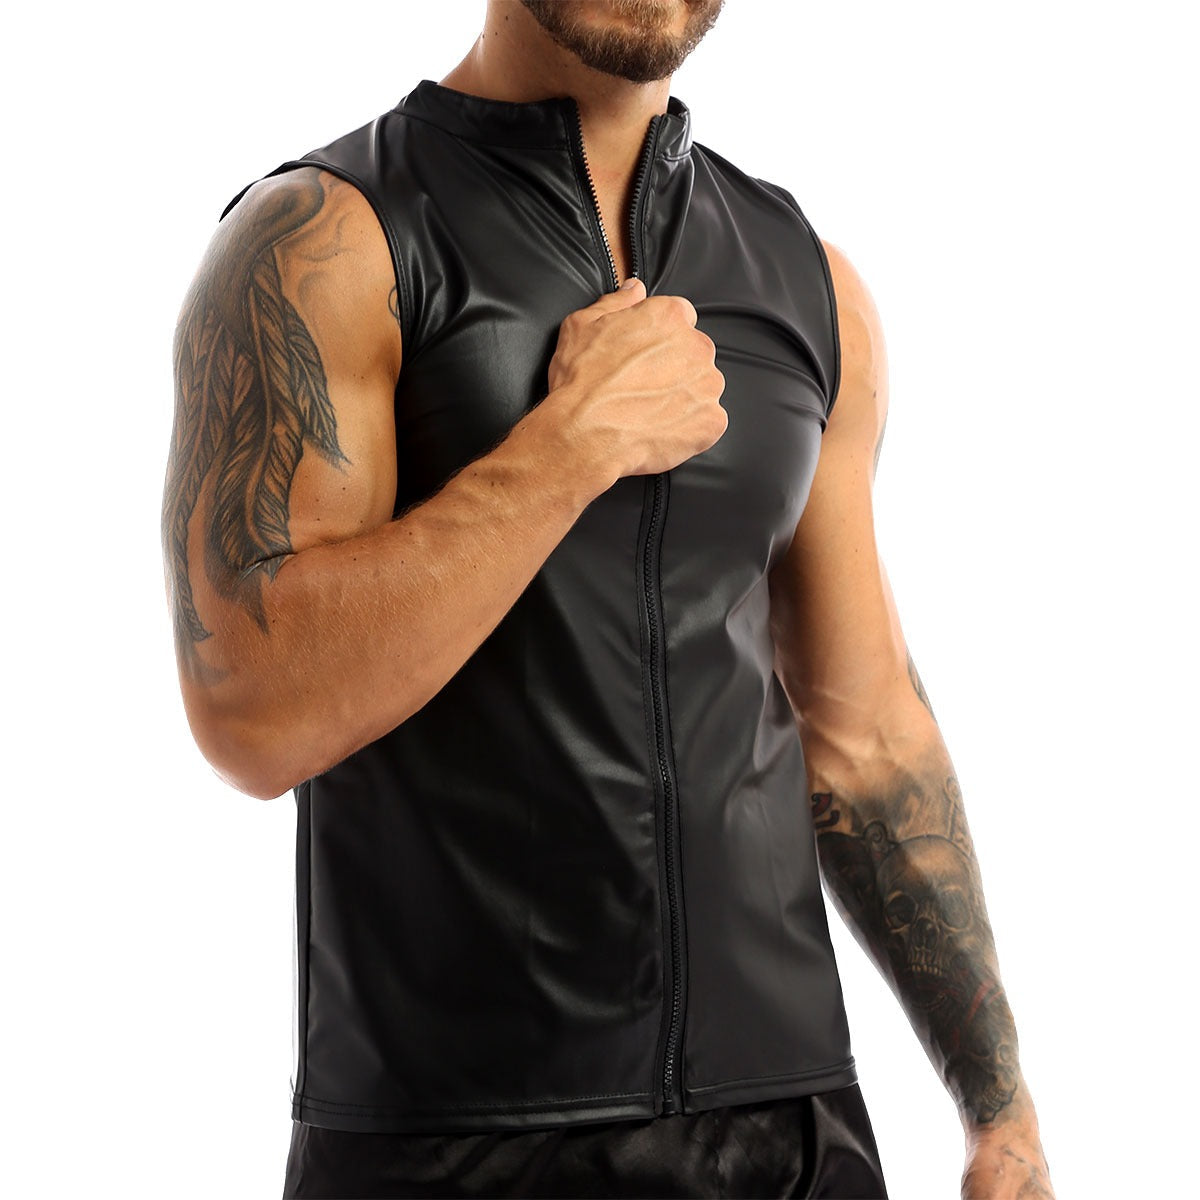 Front Zippered Tank Top For Men / Black Faux Leather Men's Vest / Stage Performance Clubwear - HARD'N'HEAVY